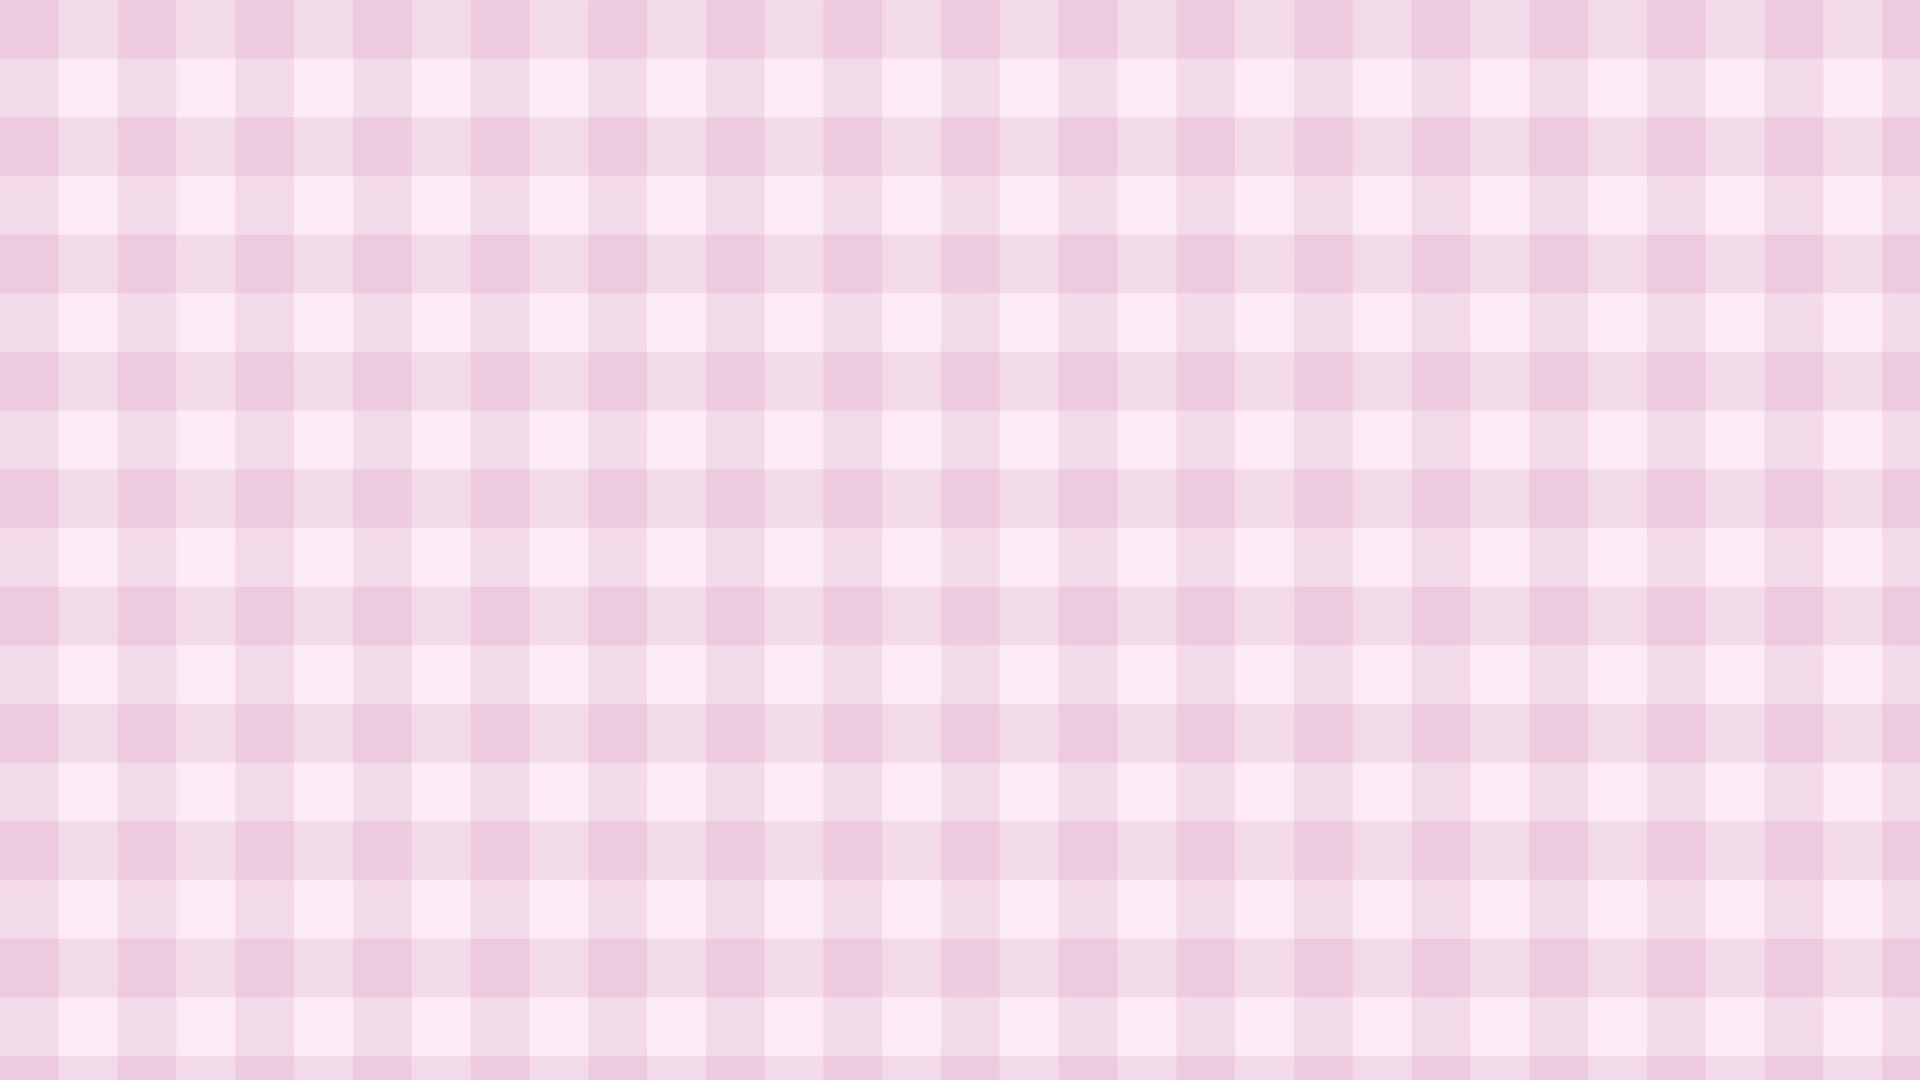 A pink and white checkered background - Cute pink